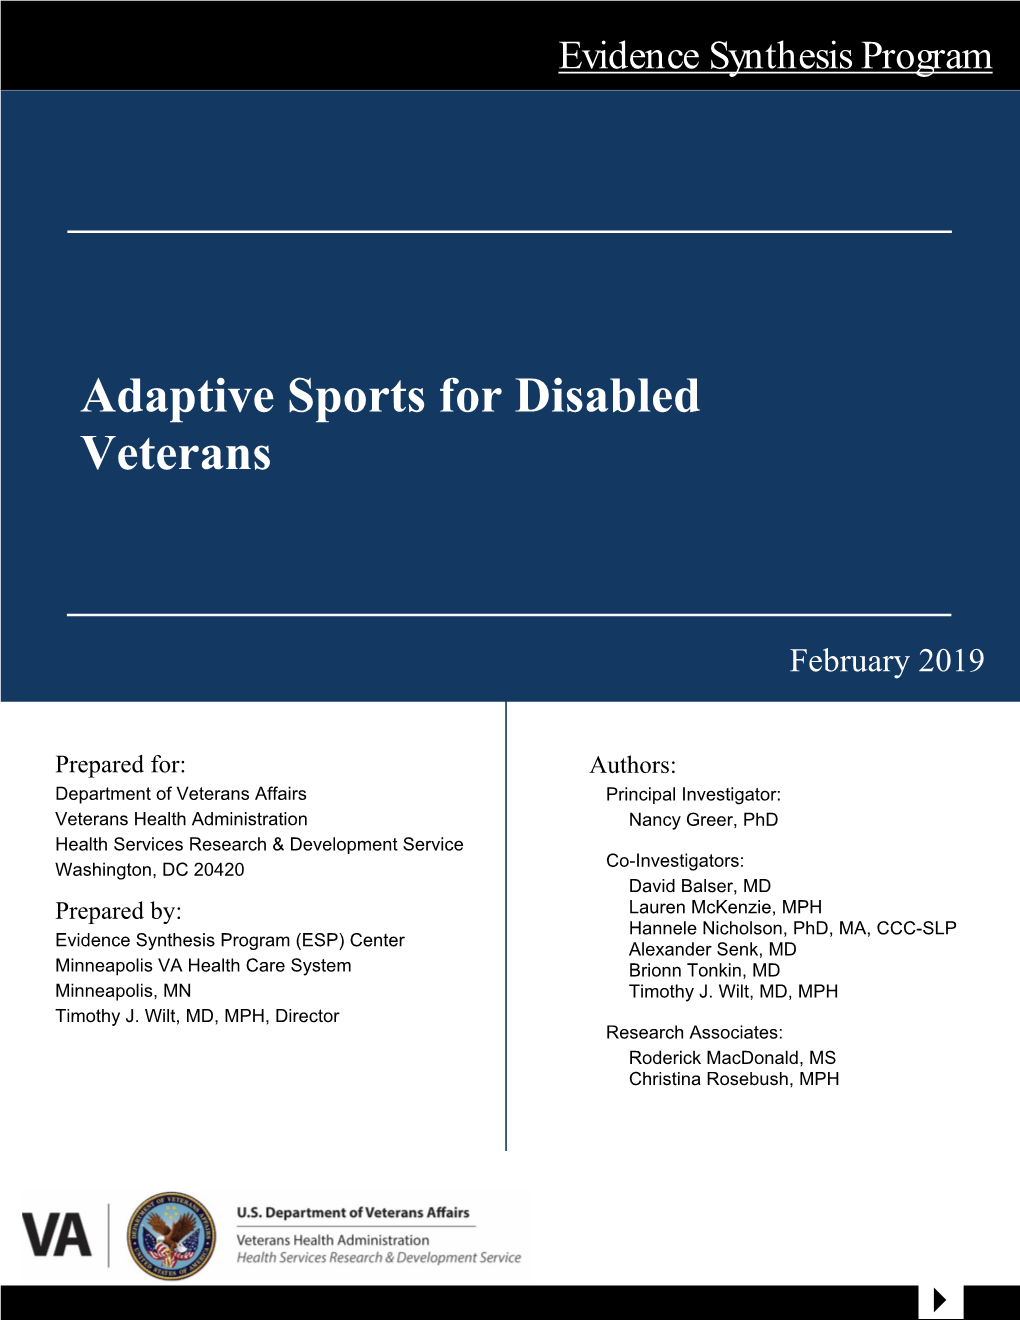 Adaptive Sports for Disabled Veterans